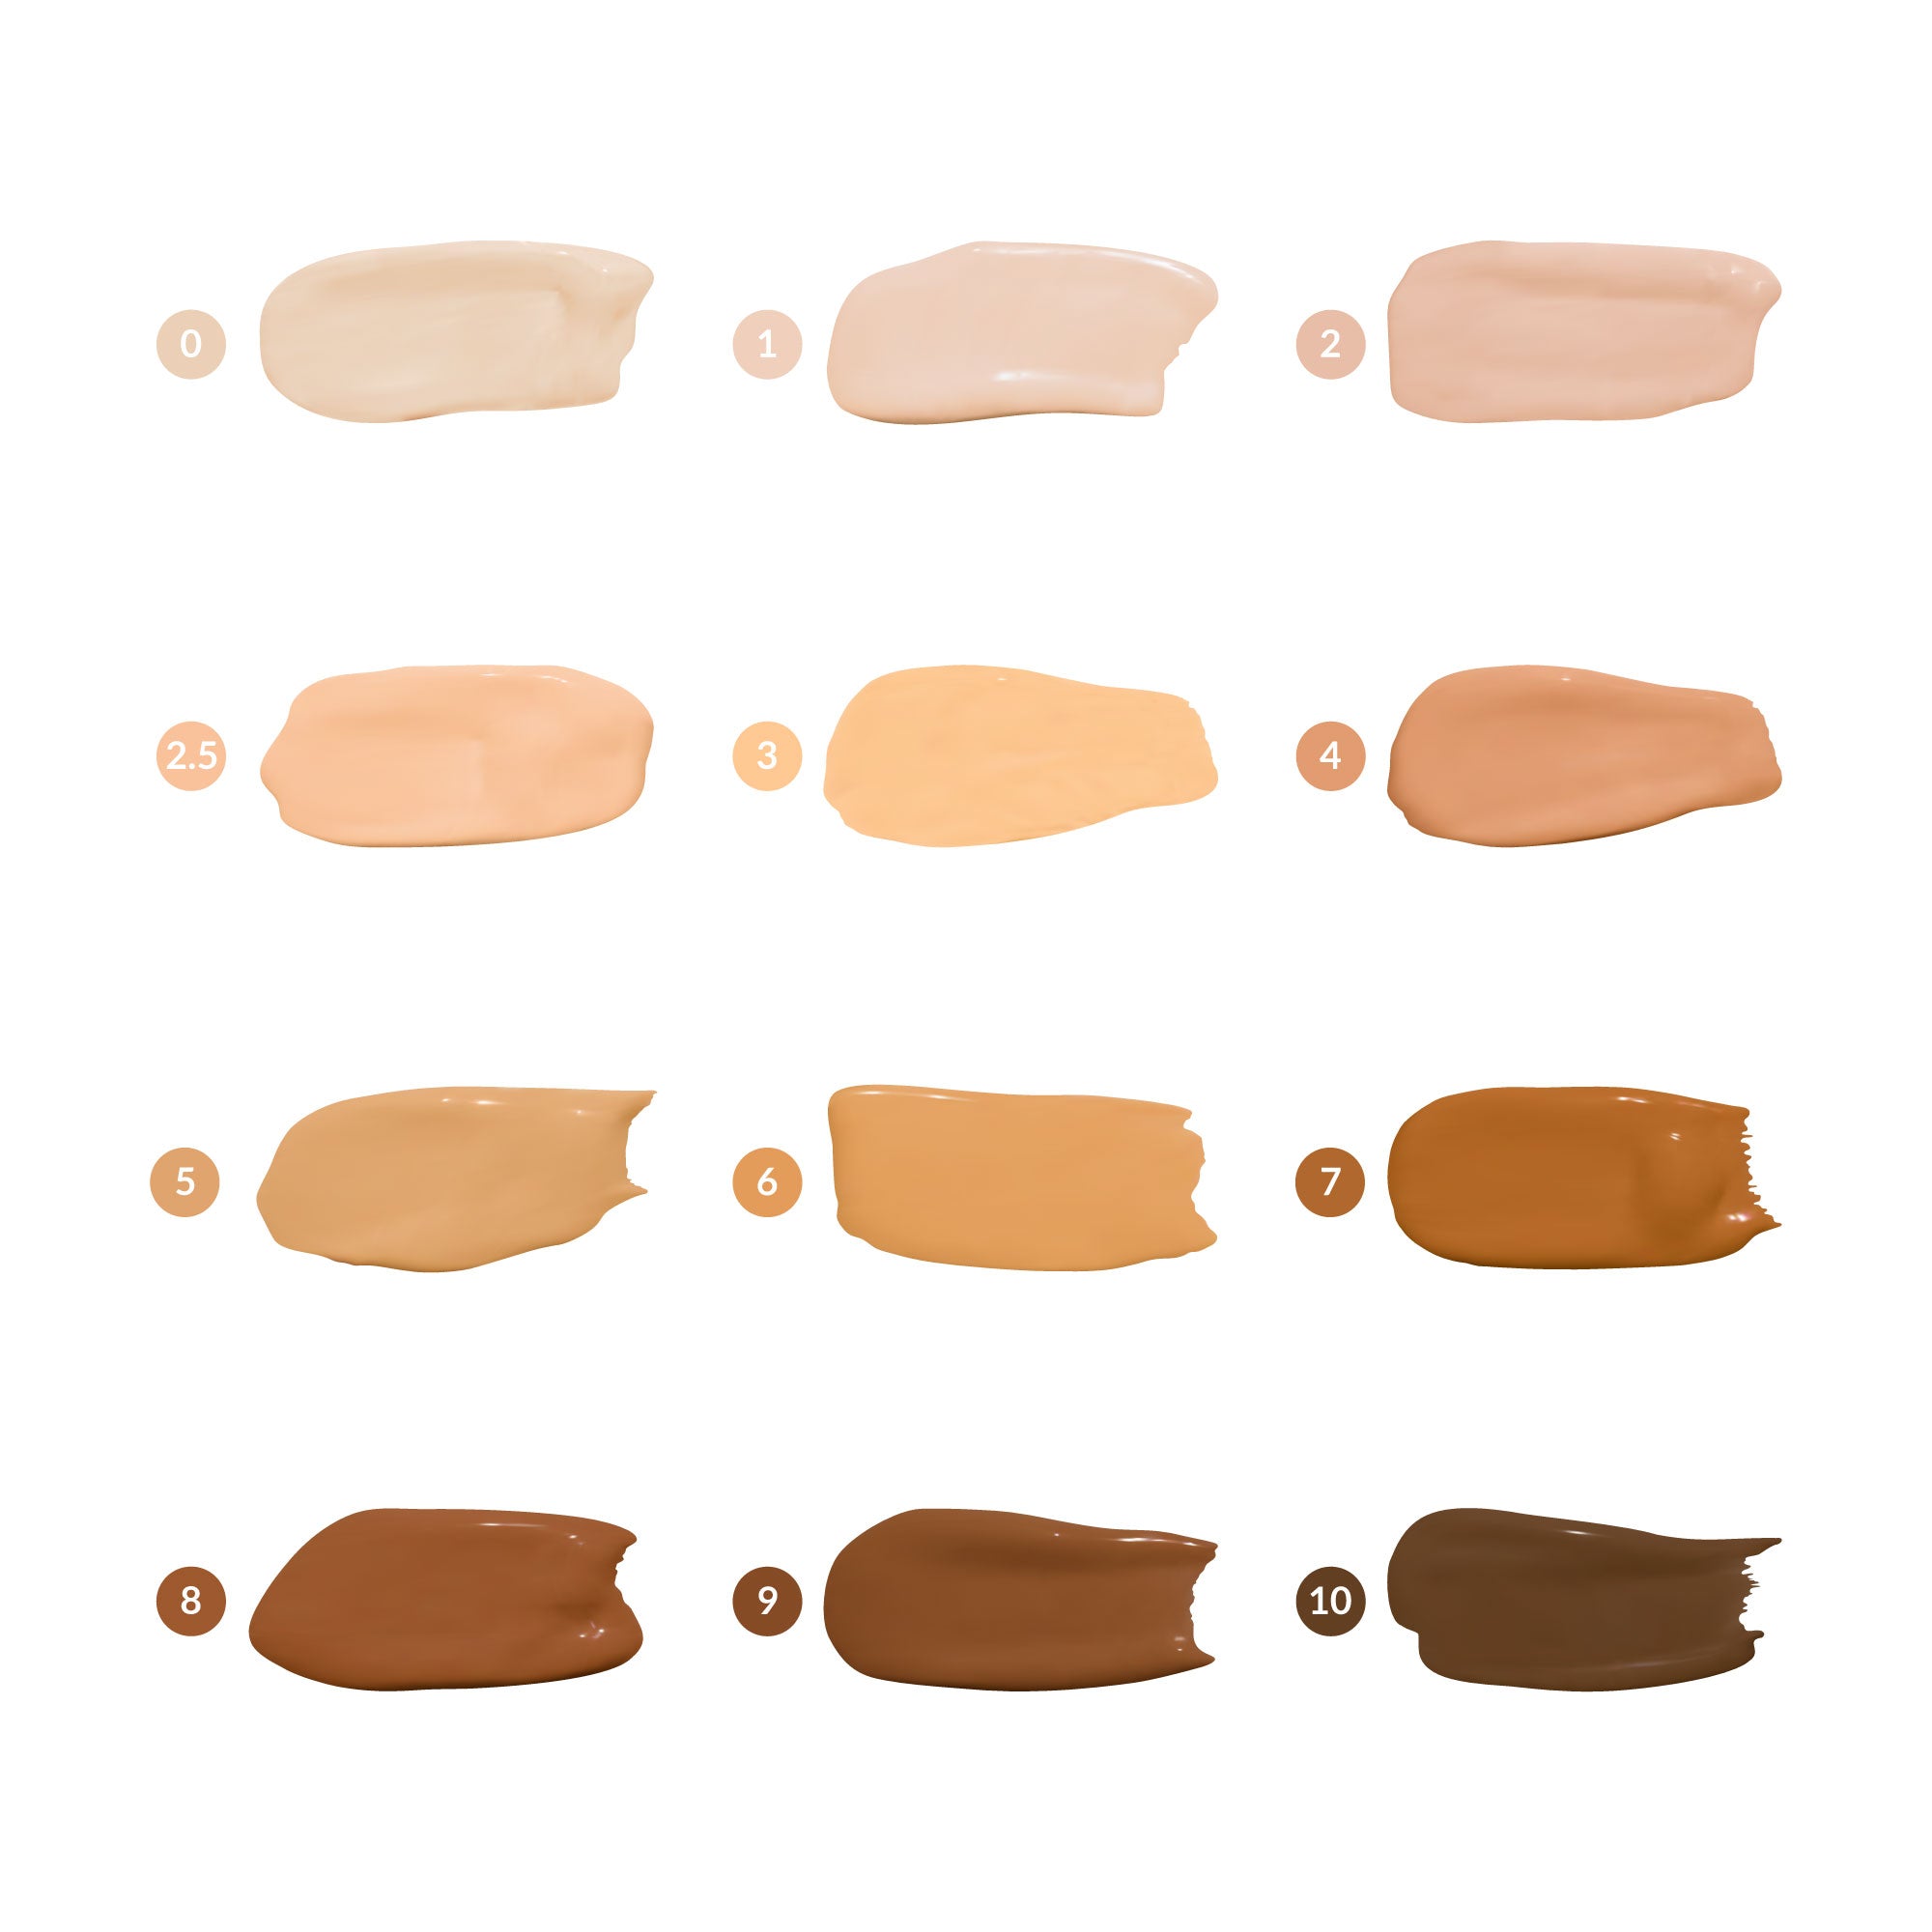 withSimplicity Liquid Foundation Swatches